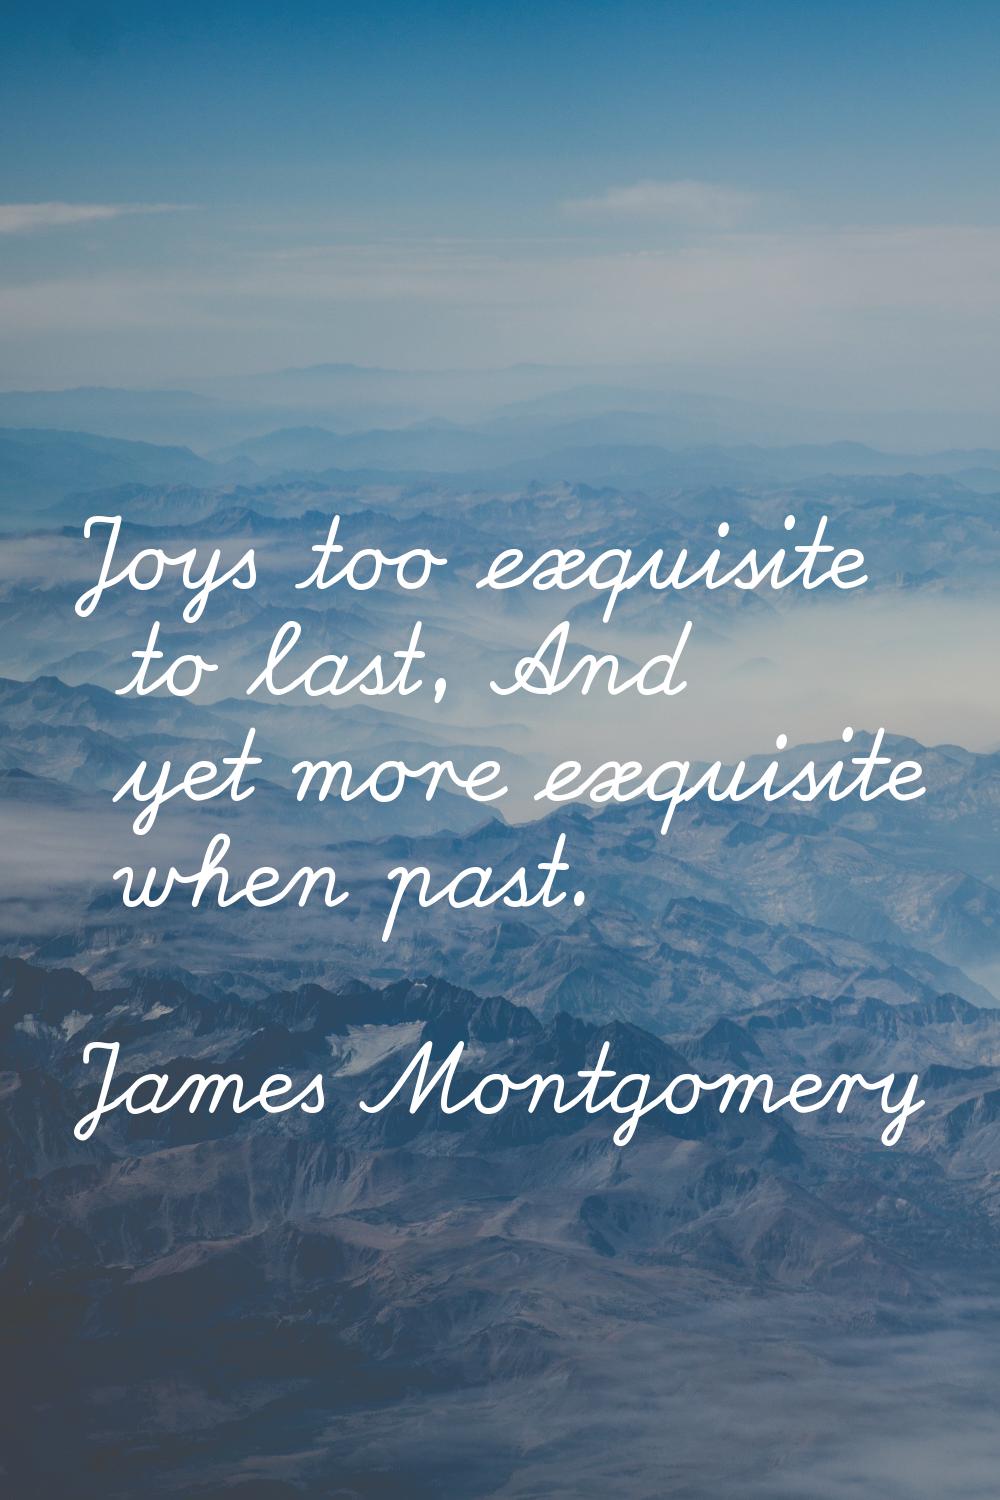 Joys too exquisite to last, And yet more exquisite when past.